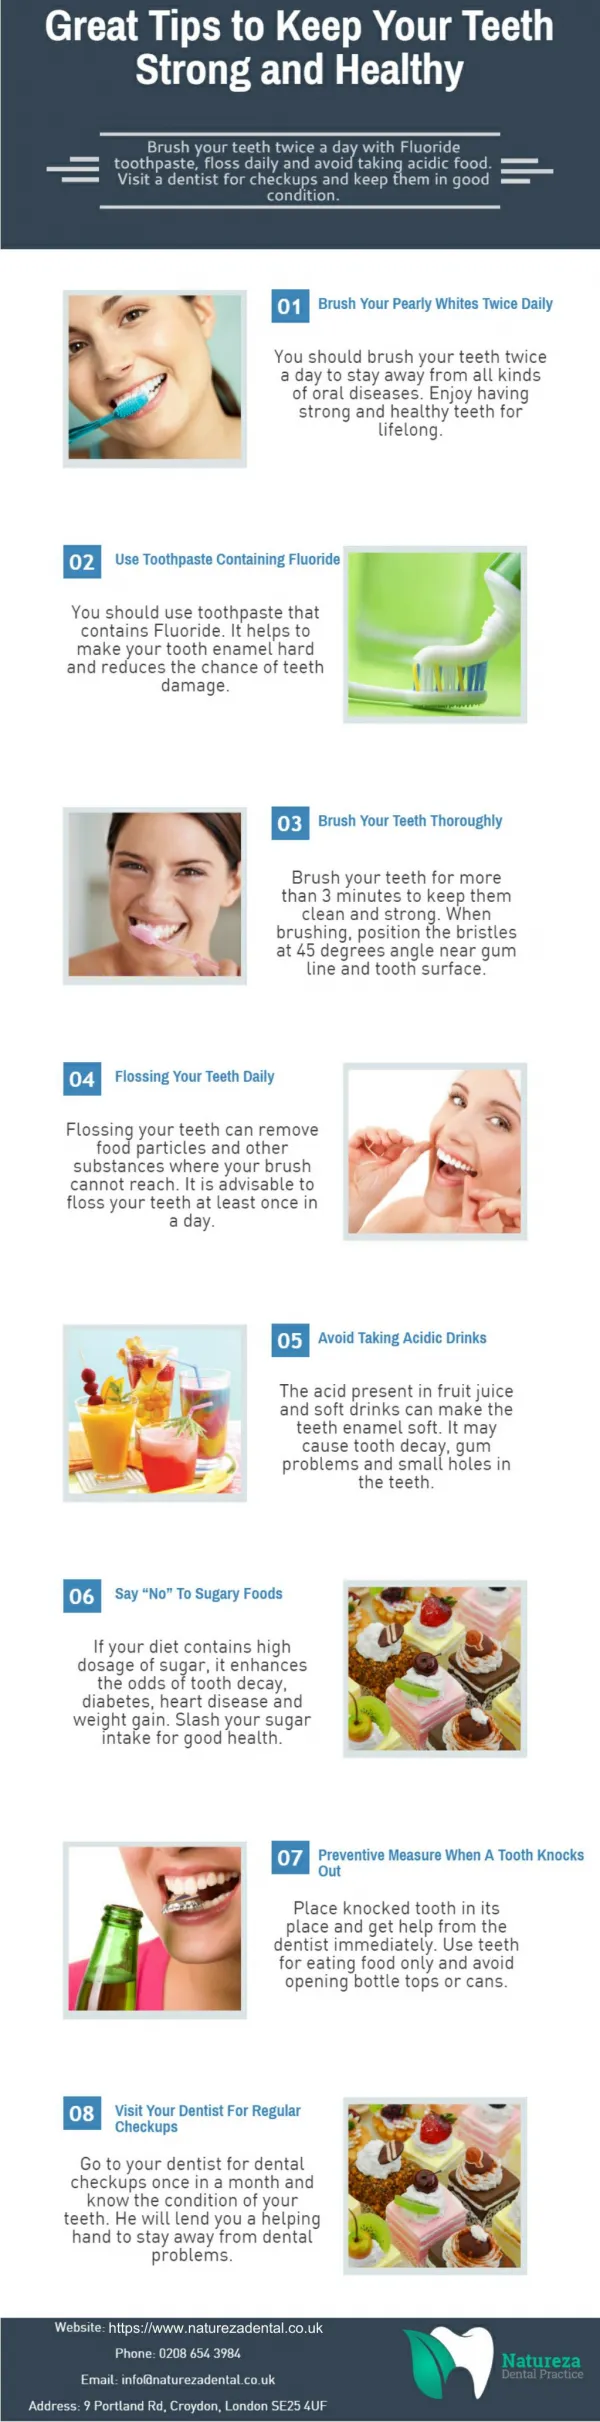 Great Tips to Keep Your Teeth Strong and Healthy